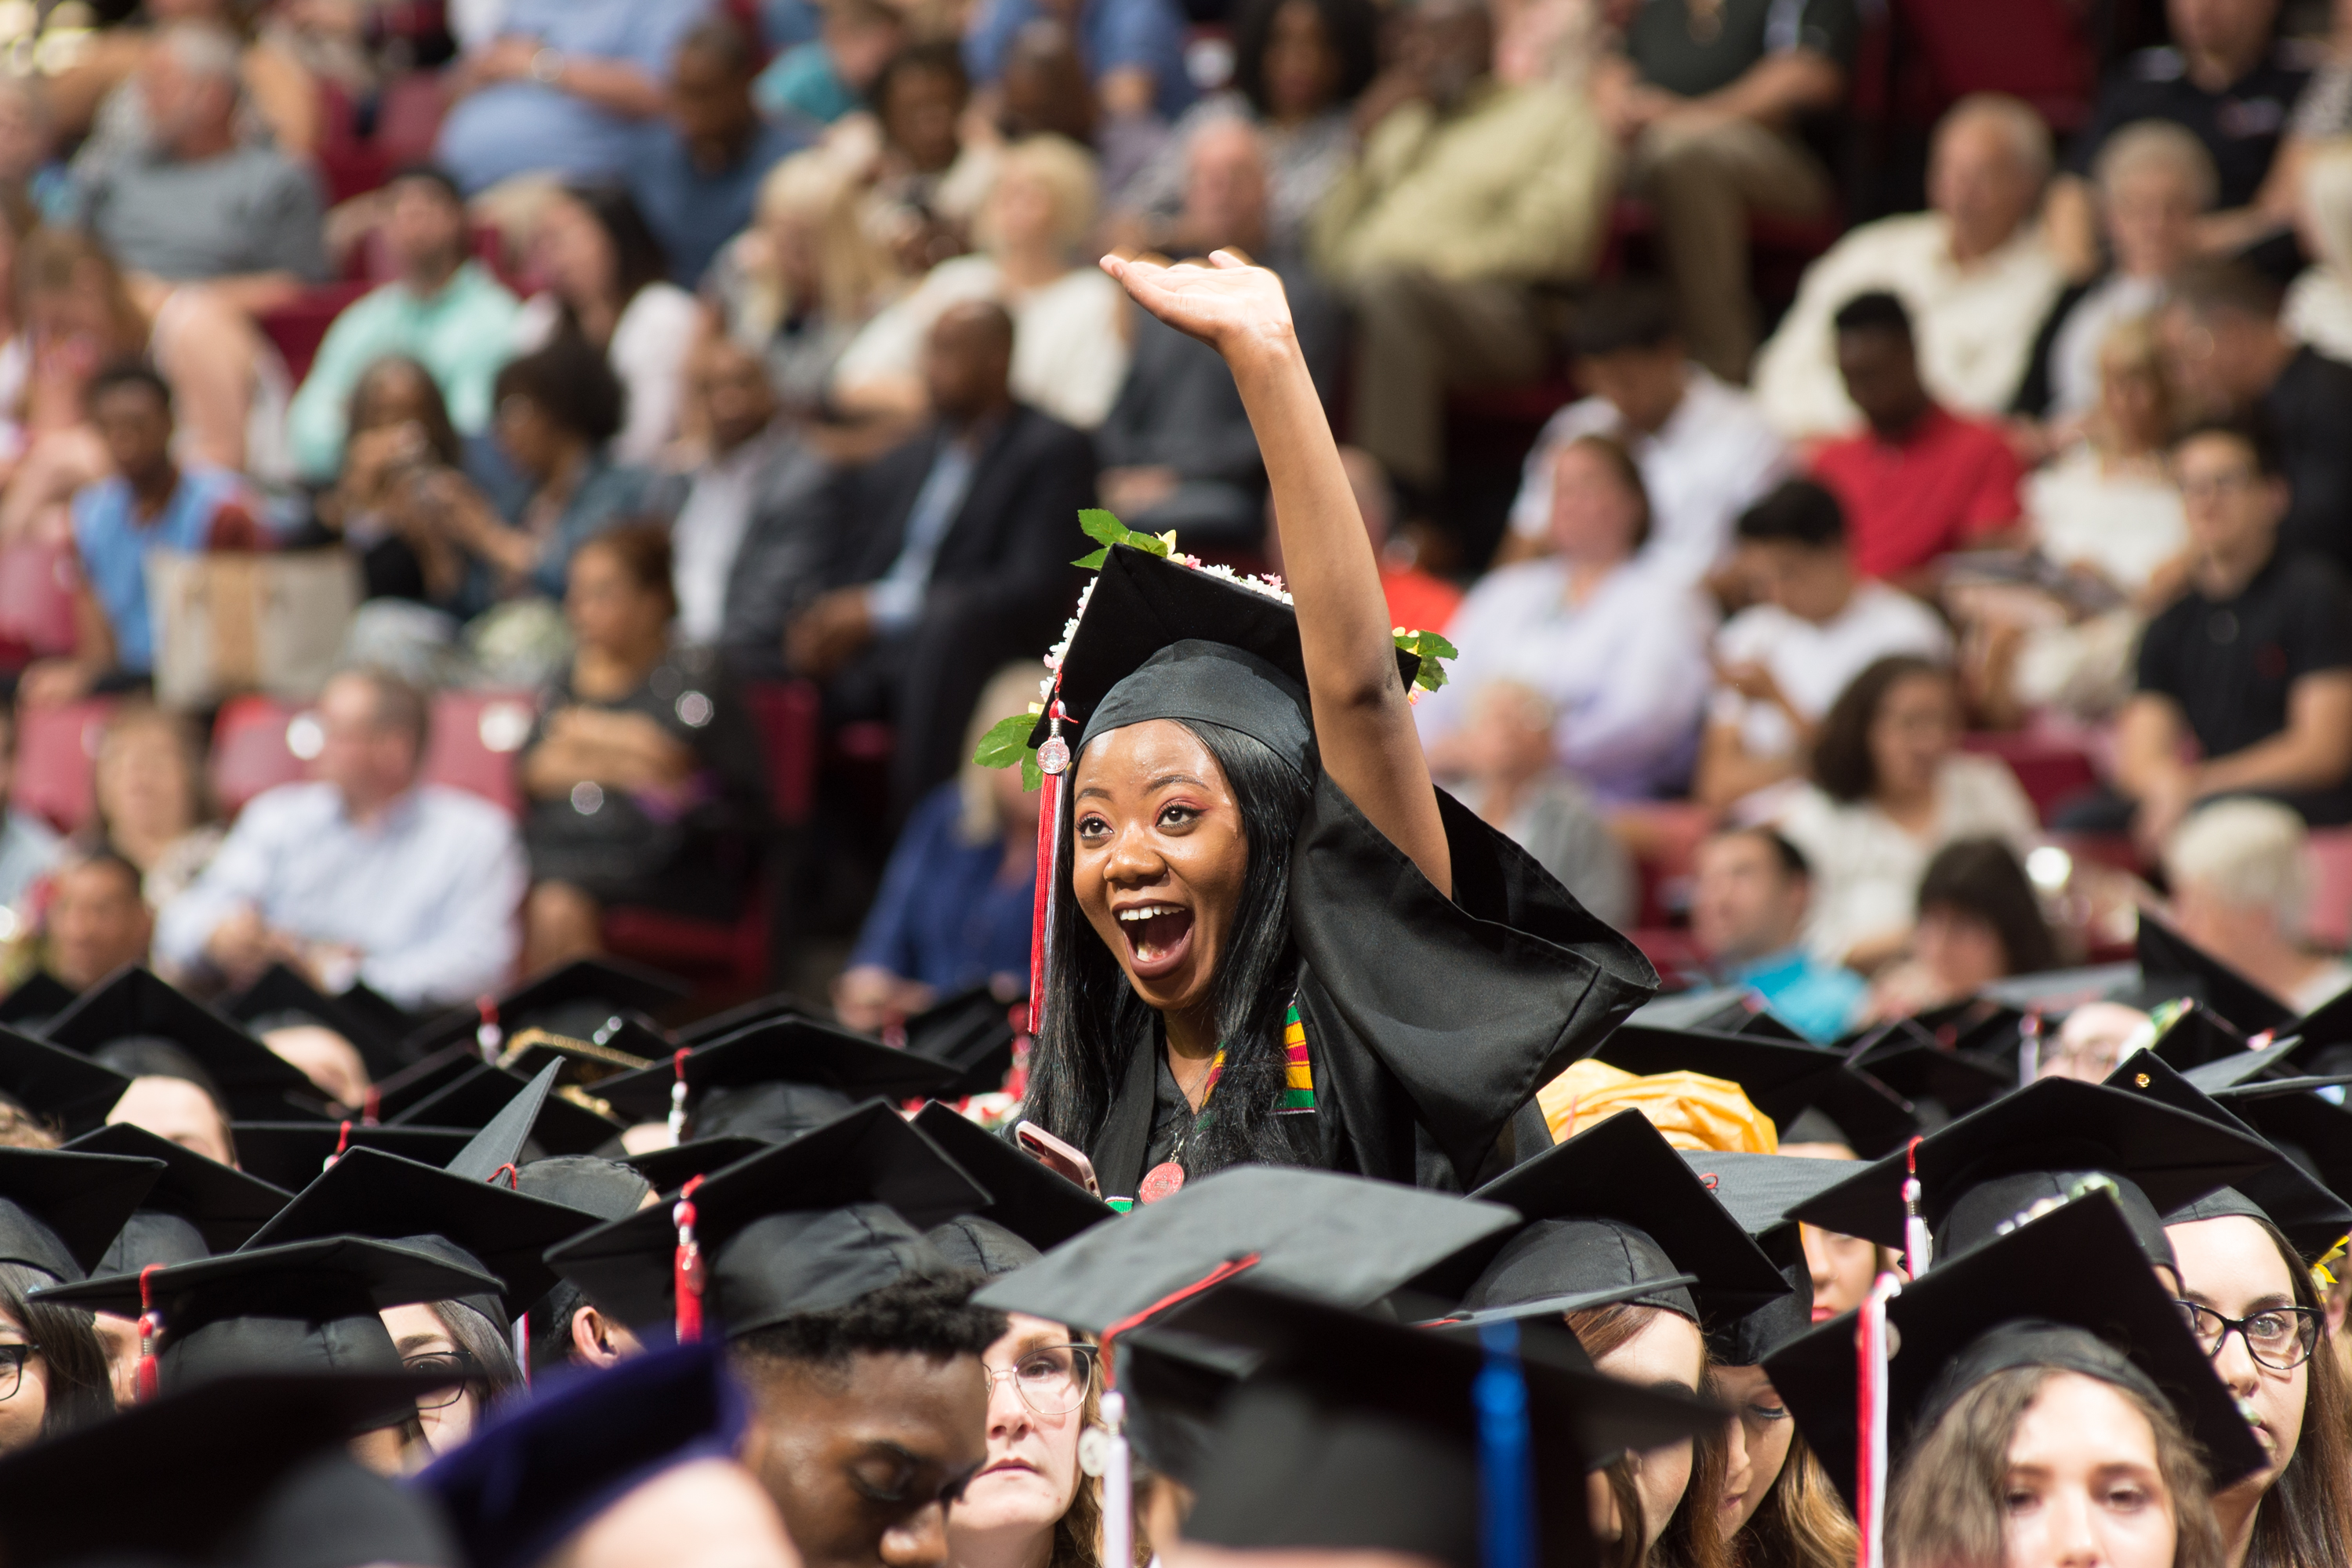 A graduate joyfully waves to someone in the crowd at Commencement